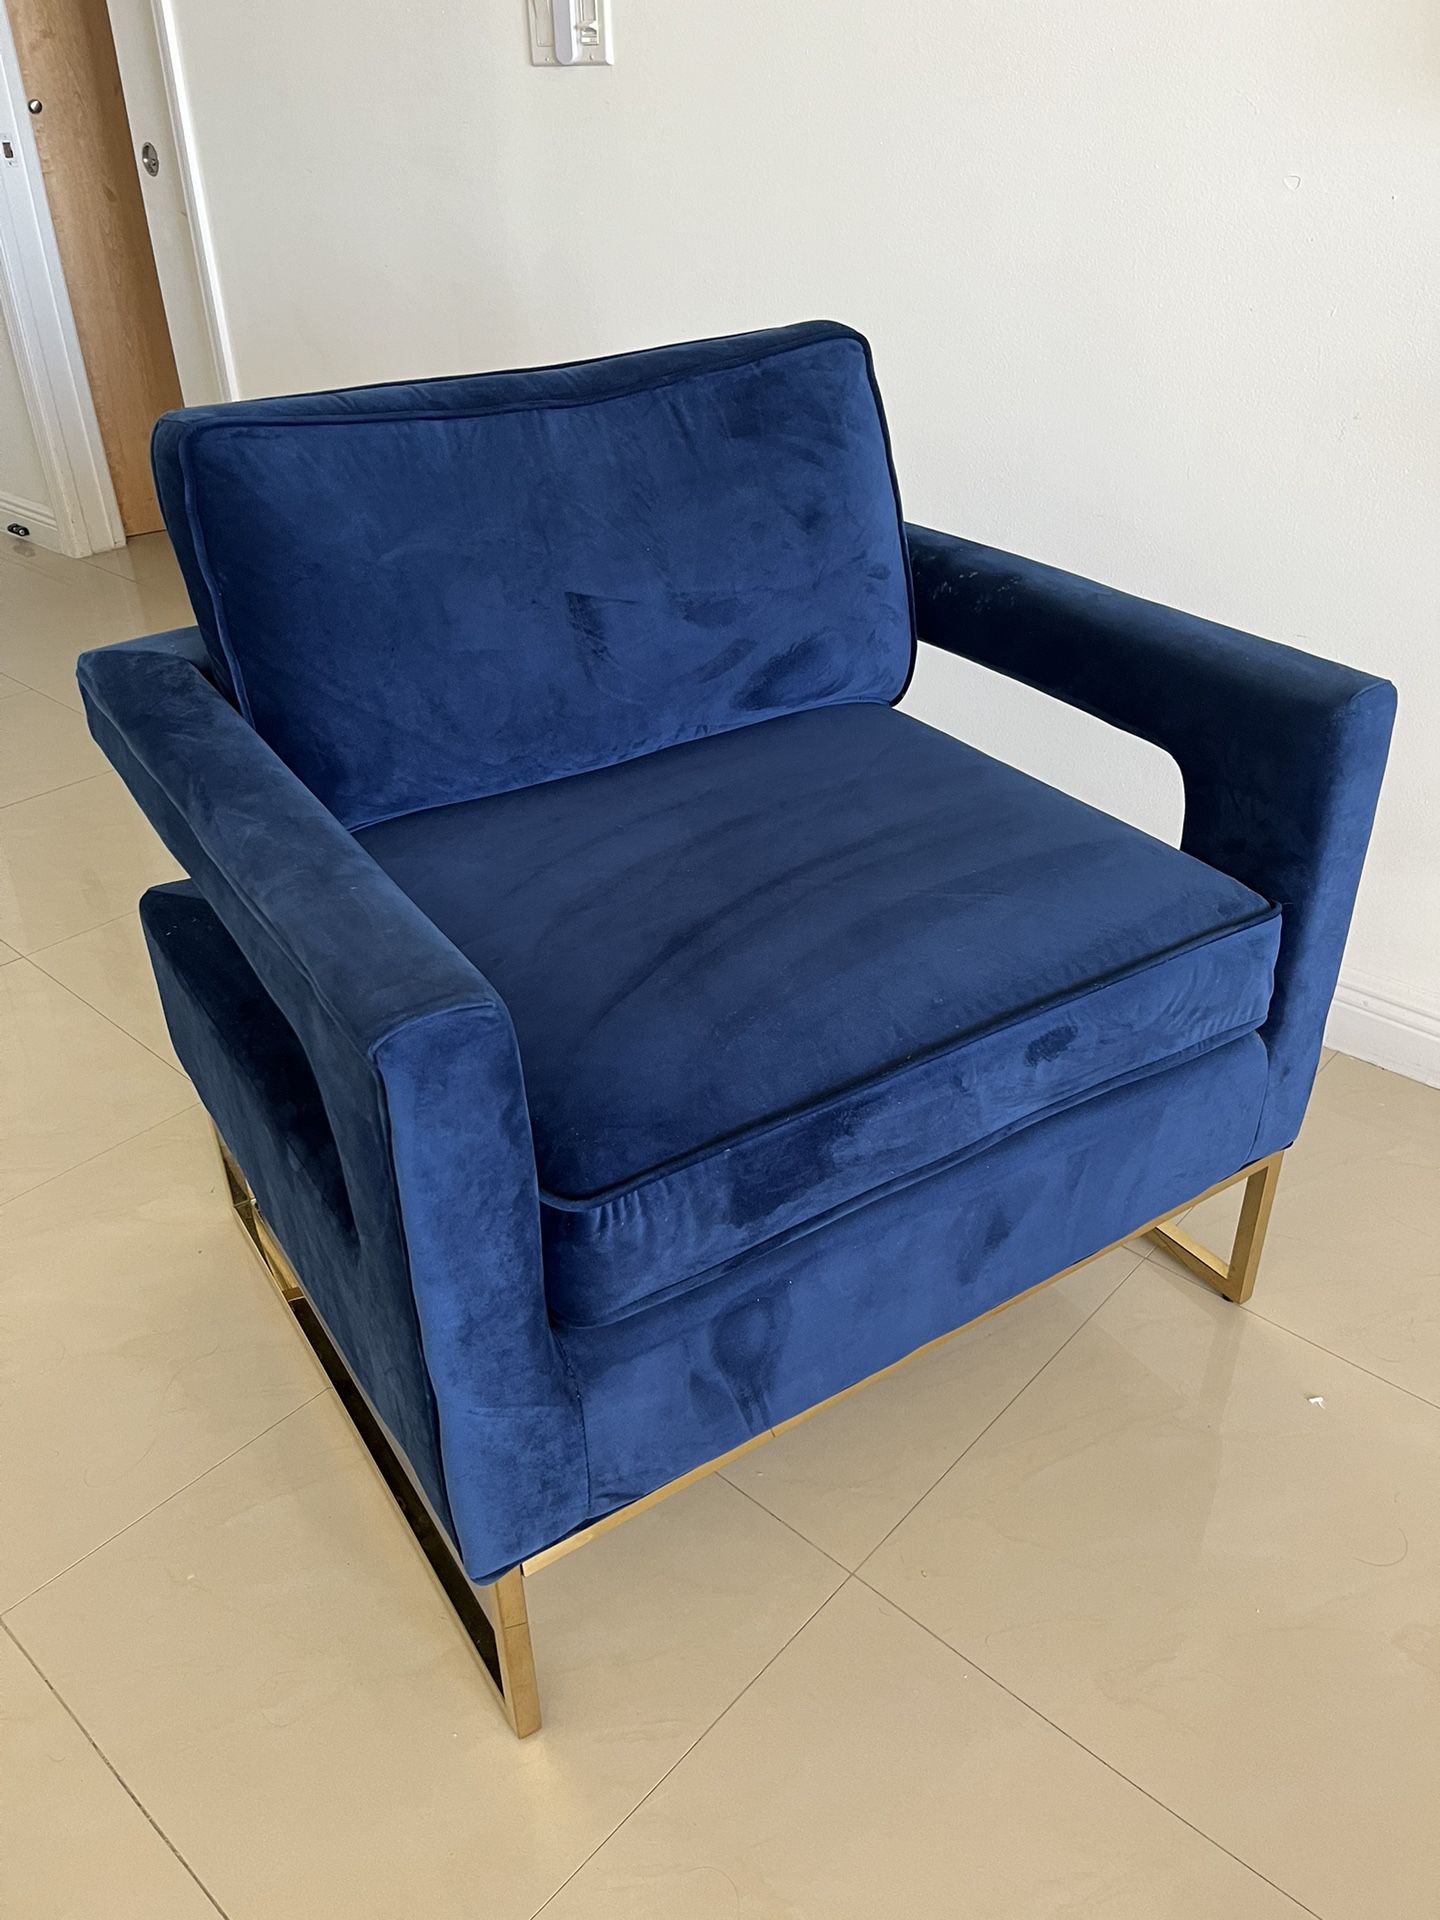 Blue Velvet Accent and Gold Chair, Armchair